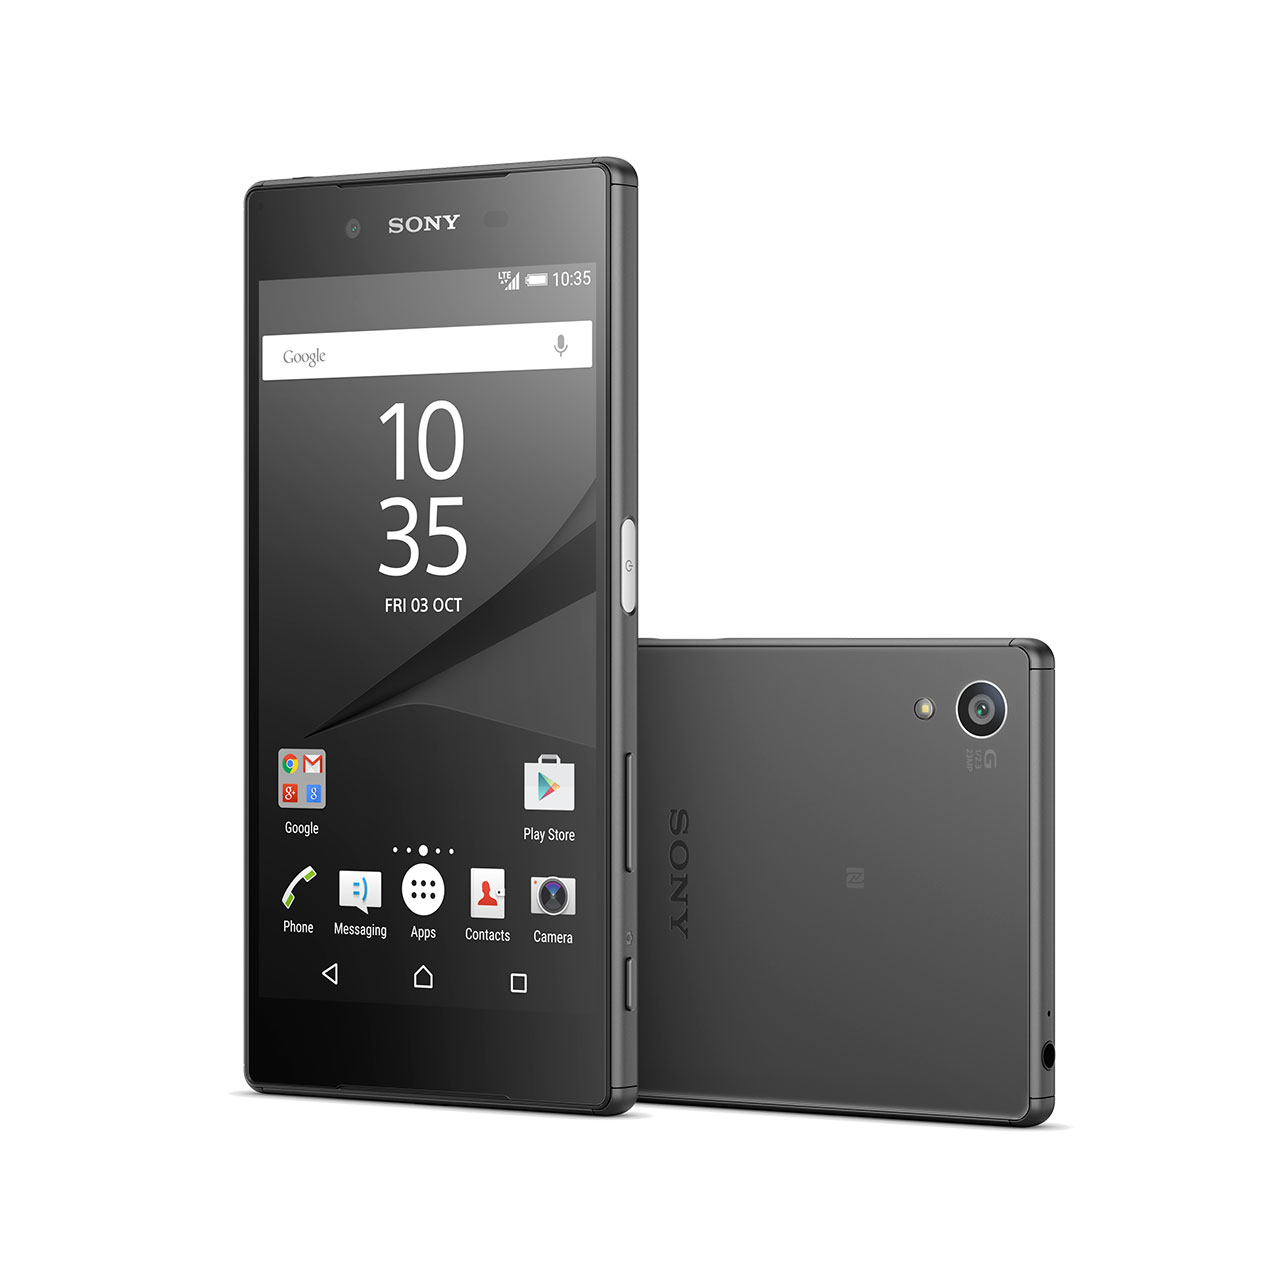 Xperia Z3 Compact Rooting: A Comprehensive Guide